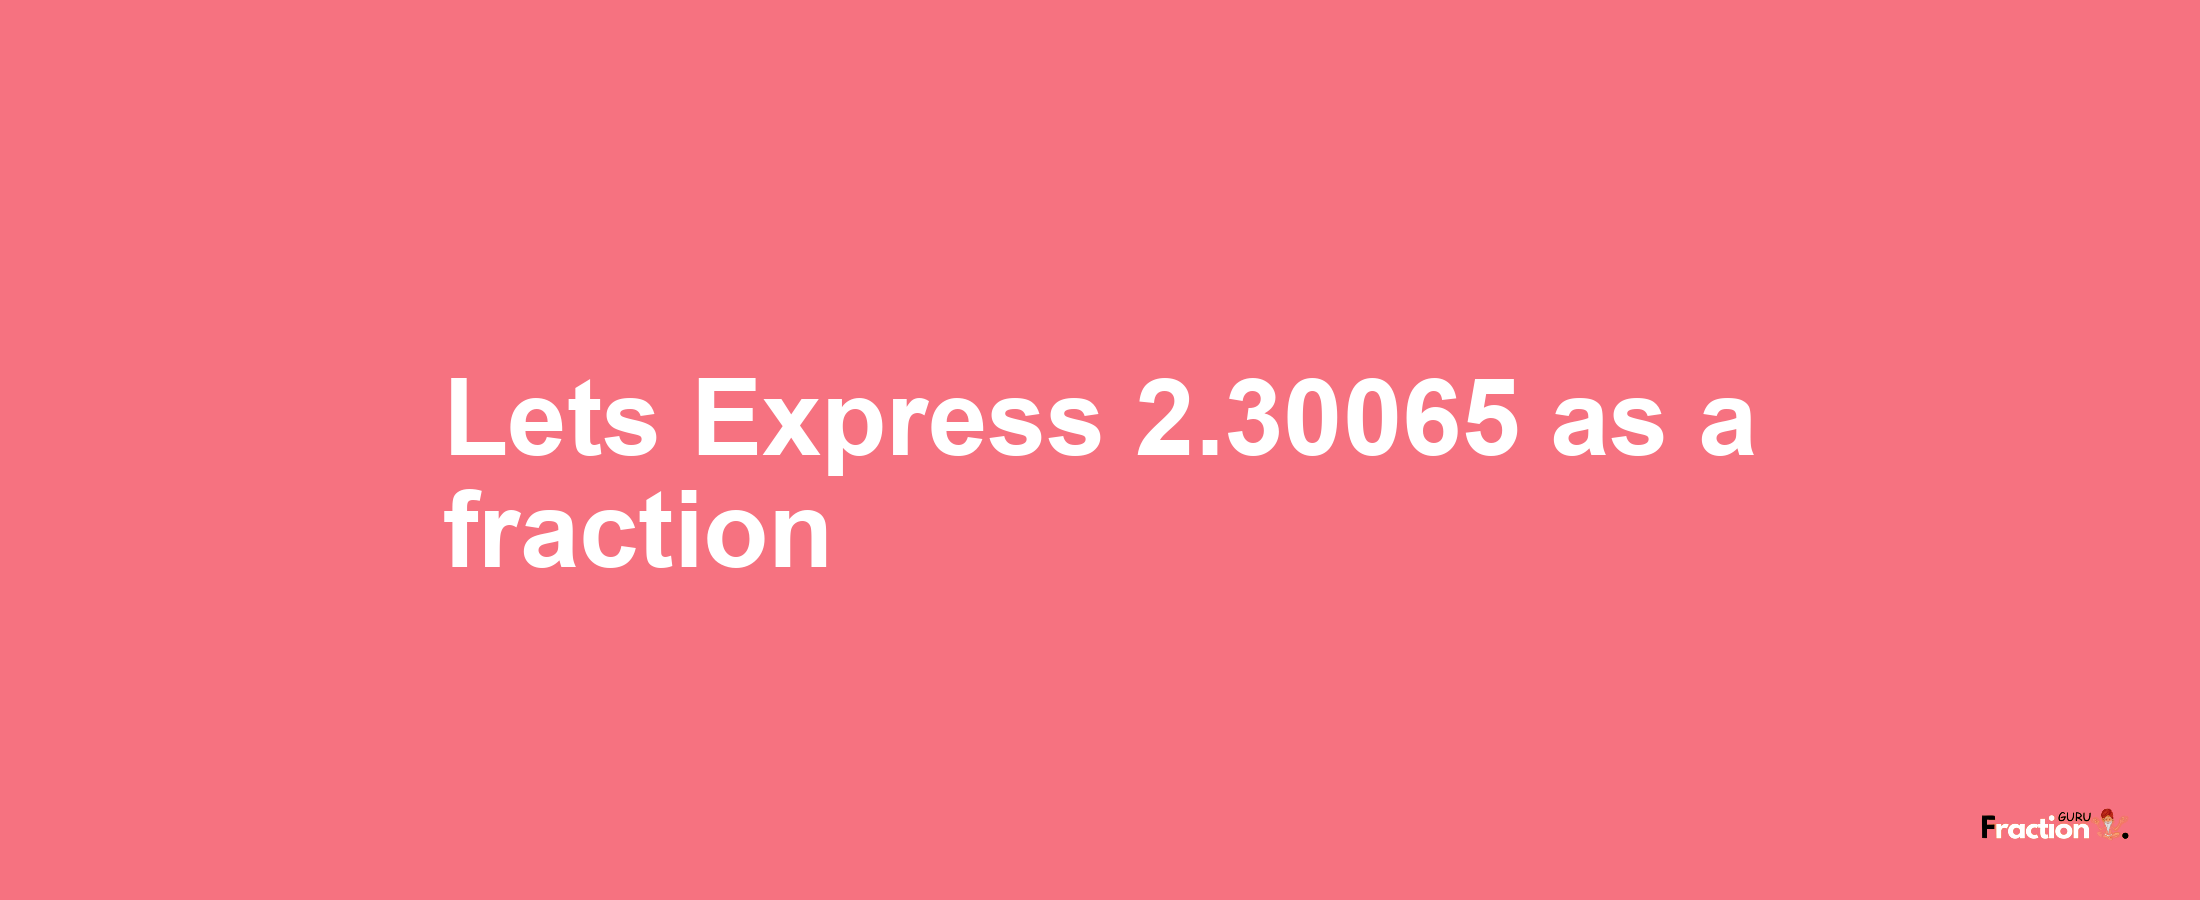 Lets Express 2.30065 as afraction